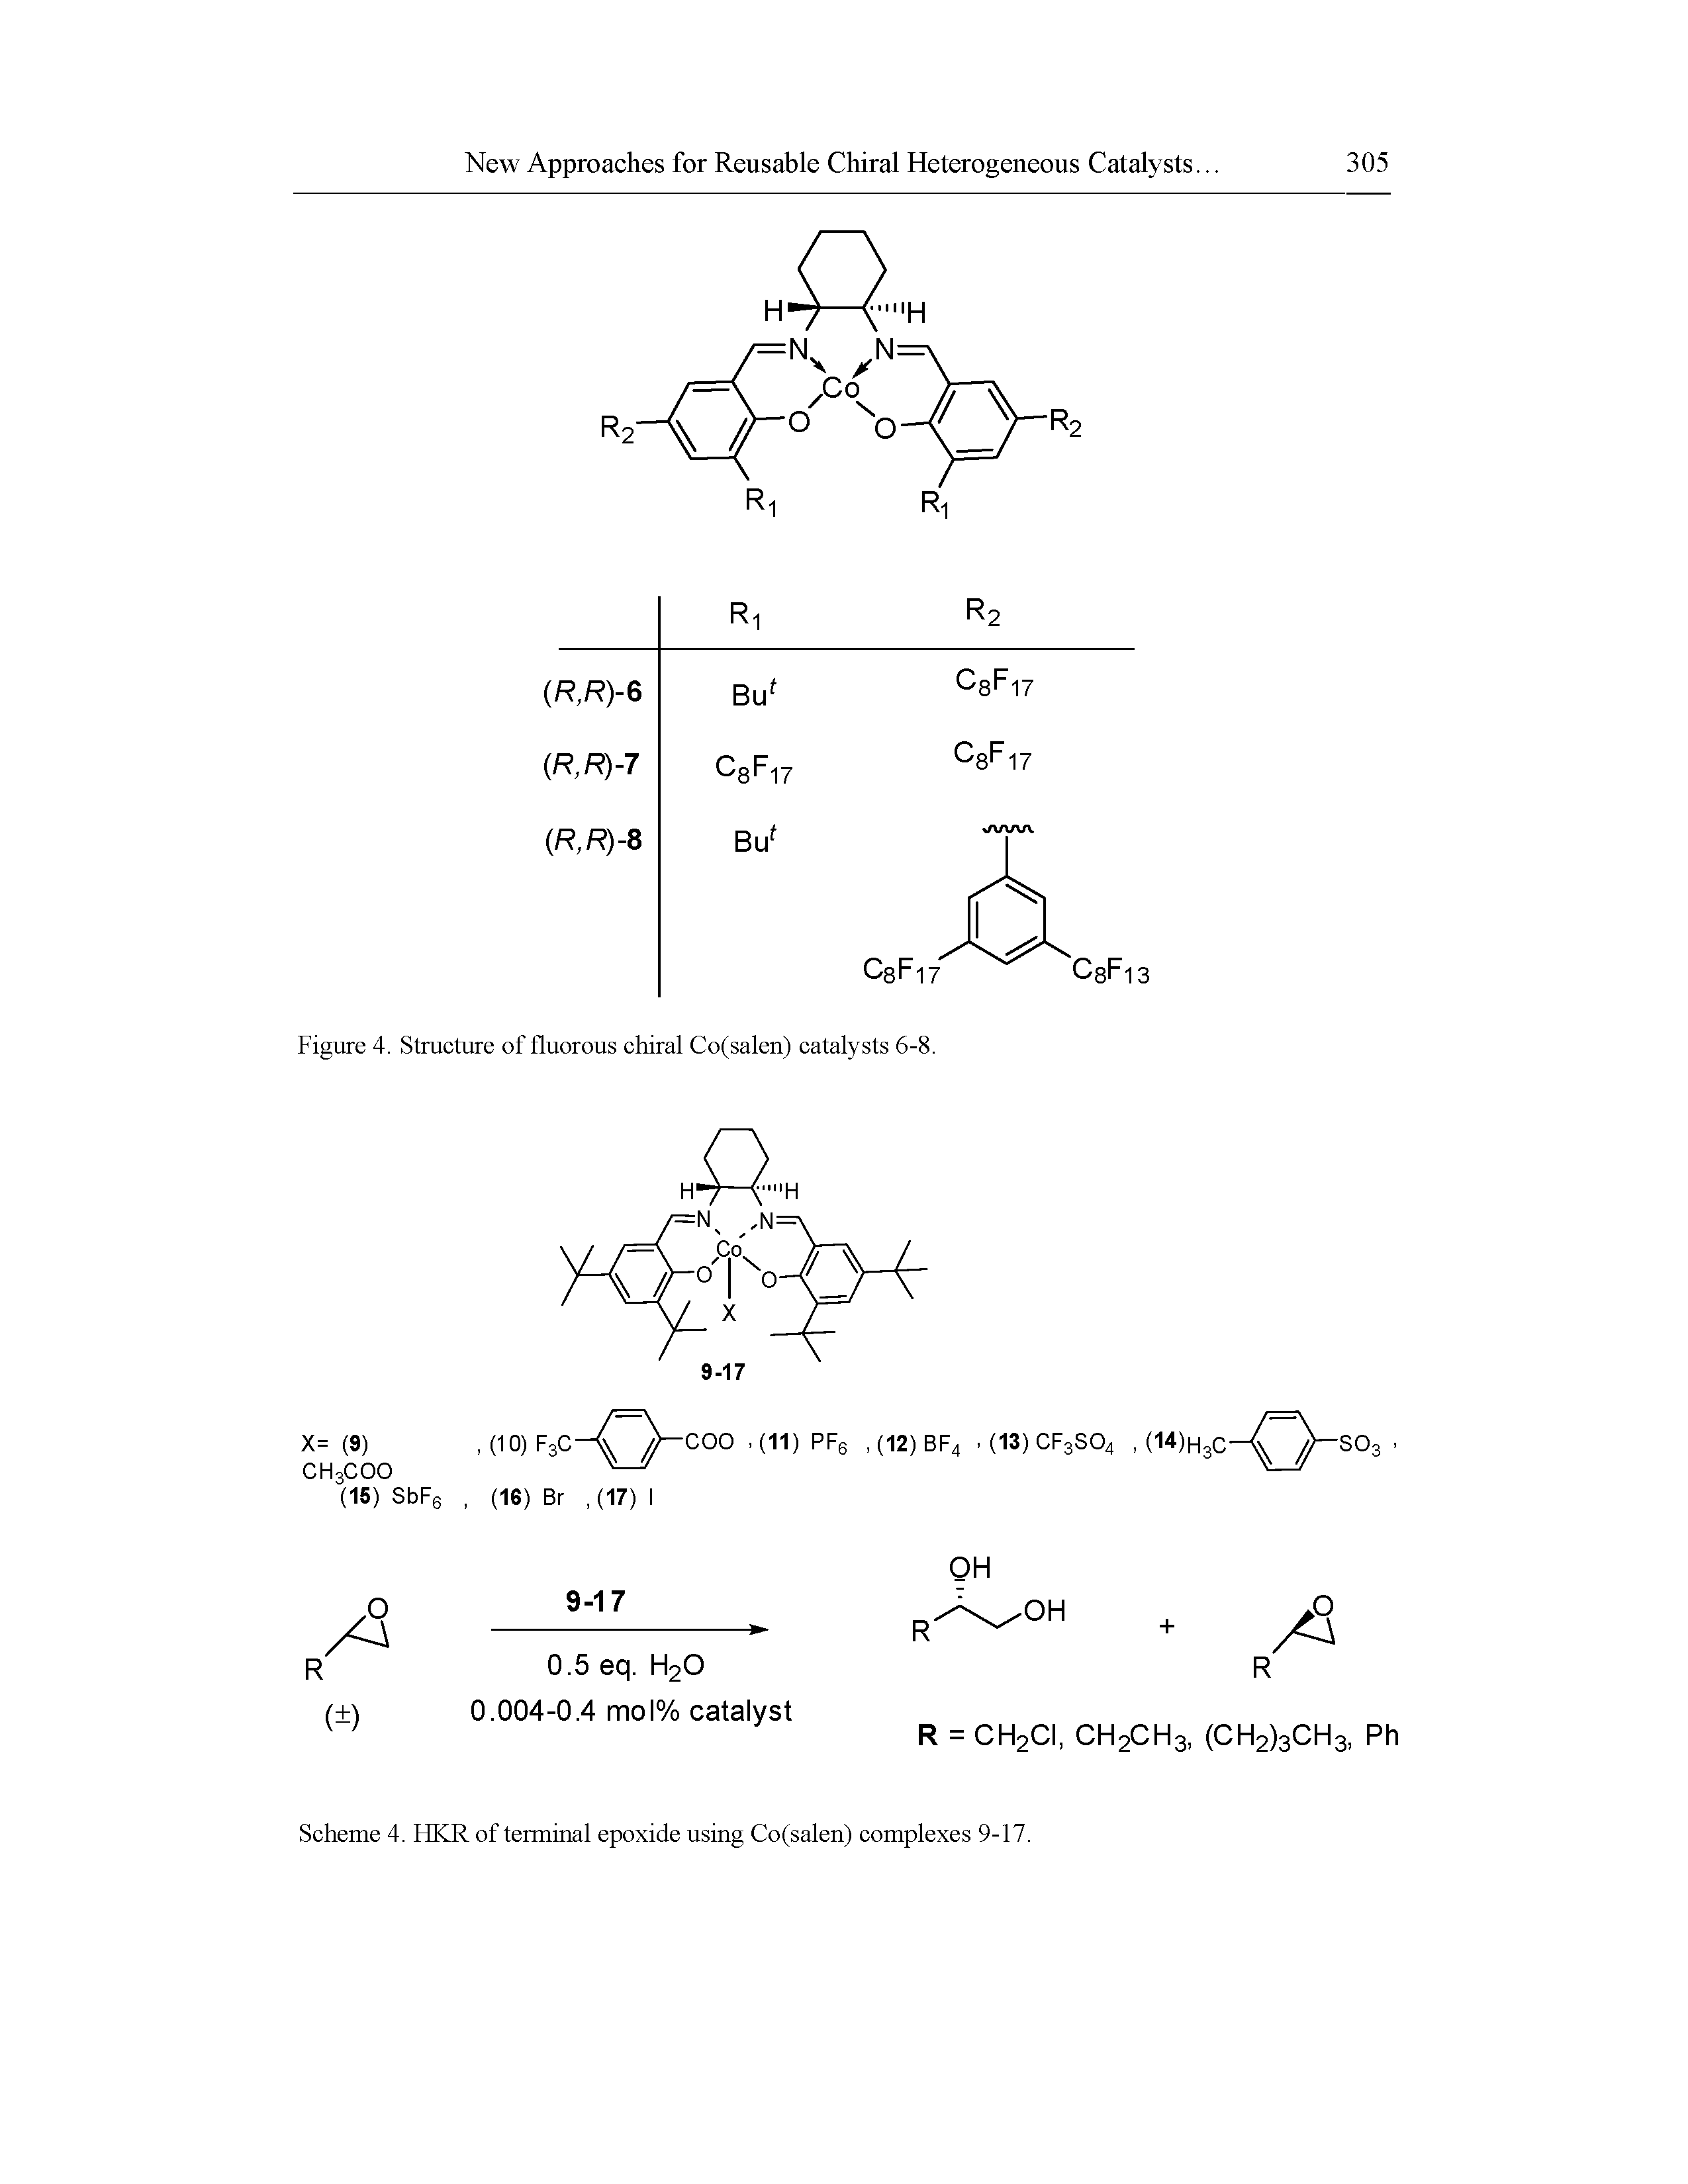 Figure 4. Structure of fluorous chiral Co(salen) catalysts 6-8.